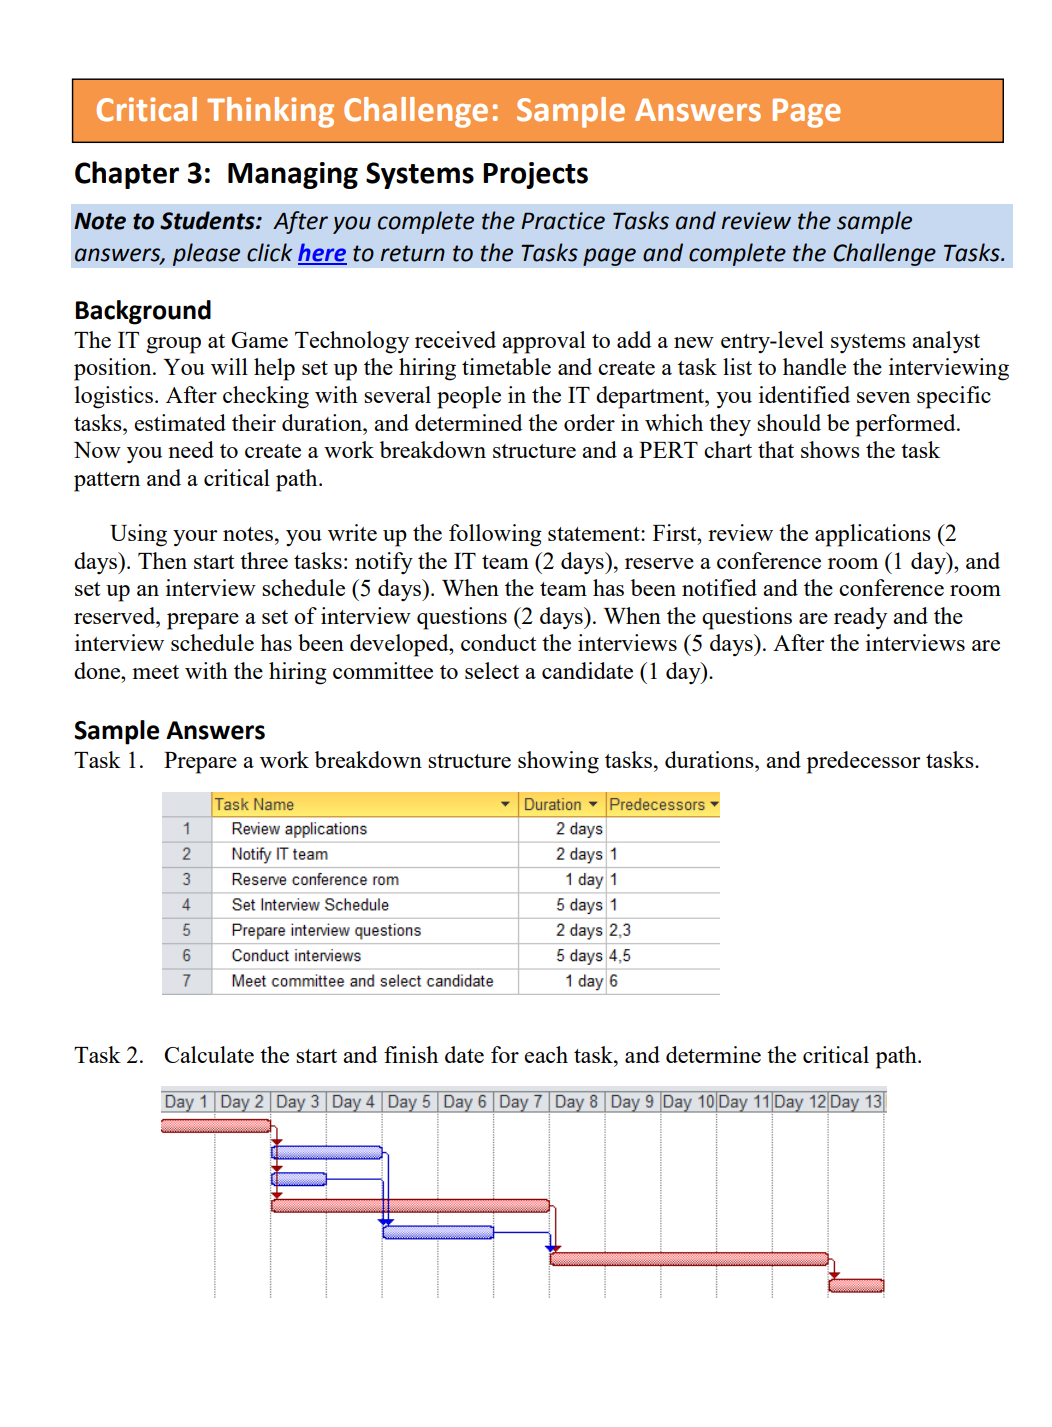 Critical Thinking Challenge: Sample Answers Page
Chapter 3: Managing Systems Projects
Note to Students: After you complete the Practice Tasks and review the sample
answers, please click here to return to the Tasks page and complete the Challenge Tasks.
Background
The IT group at Game Technology received approval to add a new entry-level systems analyst
position. You will help set up the hiring timetable and create a task list to handle the interviewing
logistics. After checking with several people in the IT department, you identified seven specific
tasks, estimated their duration, and determined the order in which they should be performed.
Now you need to create a work breakdown structure and a PERT chart that shows the task
pattern and a critical path.
Using your notes, you write up the following statement: First, review the applications (2
days). Then start three tasks: notify the IT team (2 days), reserve a conference room (1 day), and
set up an interview schedule (5 days). When the team has been notified and the conference room
reserved, prepare a set of interview questions (2 days). When the questions are ready and the
interview schedule has been developed, conduct the interviews (5 days). After the interviews are
done, meet with the hiring committee to select a candidate (1 day).
Sample Answers
Task 1. Prepare a work breakdown structure showing tasks, durations, and predecessor tasks.
Task Name
Duration - Predecessors
1
Review applications
2 days
2
Notify IT team
2 days 1
1 day 1
5 days 1
2 days 2,3
3
Reserve conference rom
4
Set Interview Schedule
Prepare interview questions
6.
Conduct interviews
5 days 4,5
7
Meet committee and select candidate
1 day 6
Task 2. Calculate the start and finish date for each task, and determine the critical path.
Day 1 Day 2 Day 3 Day 4 Day 5 Day 6 Day 7 Day 8 Day 9 Day 10 Day 11 Day 12 Day 13|
